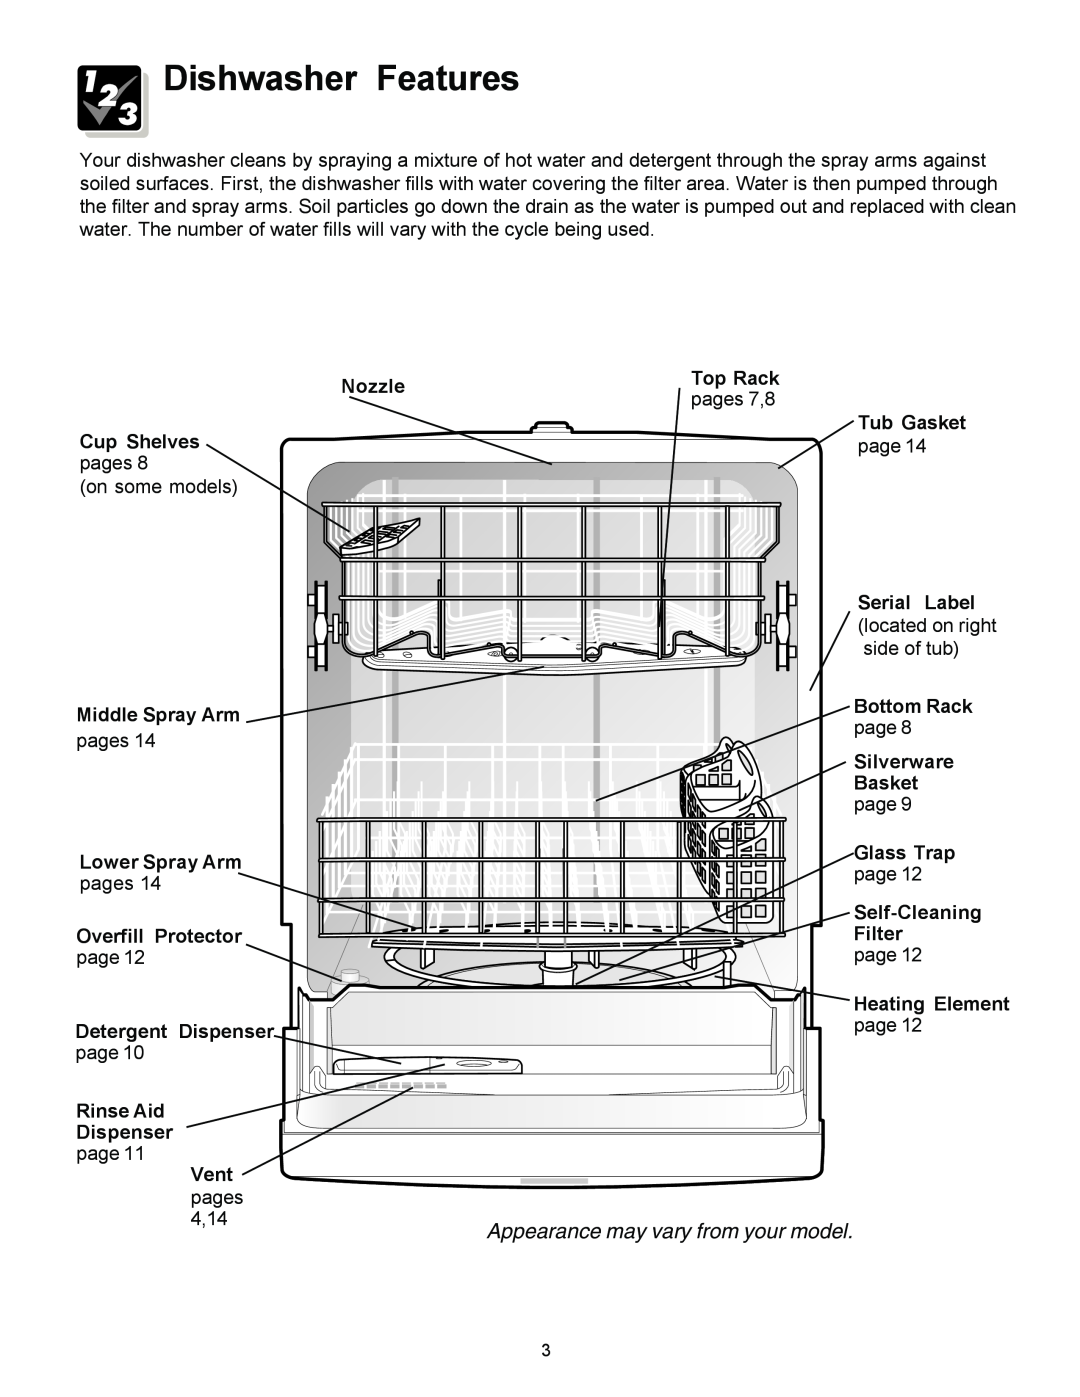 Frigidaire 1400, 154595201 manual Dishwasher Features, Appearance may vary from your model 